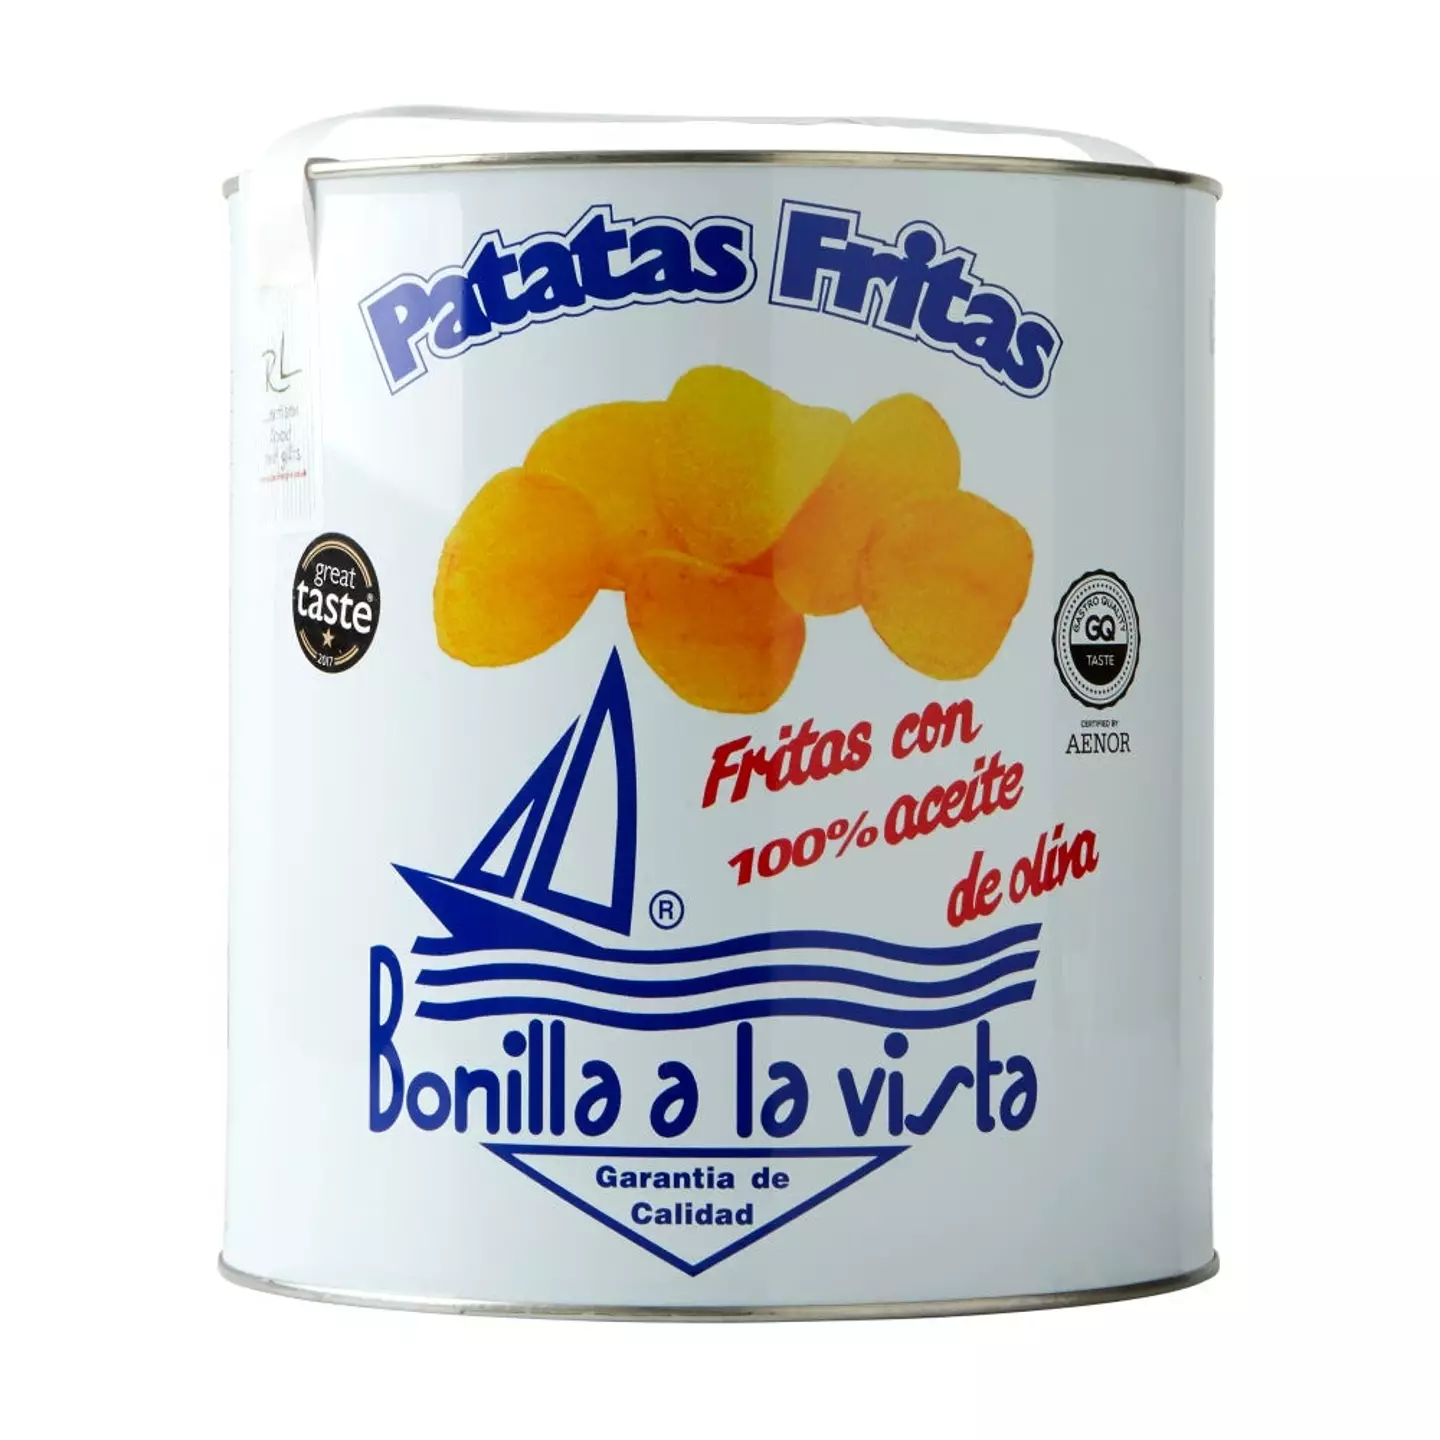 The crisps come in ready salted flavour and are sold in a tin (